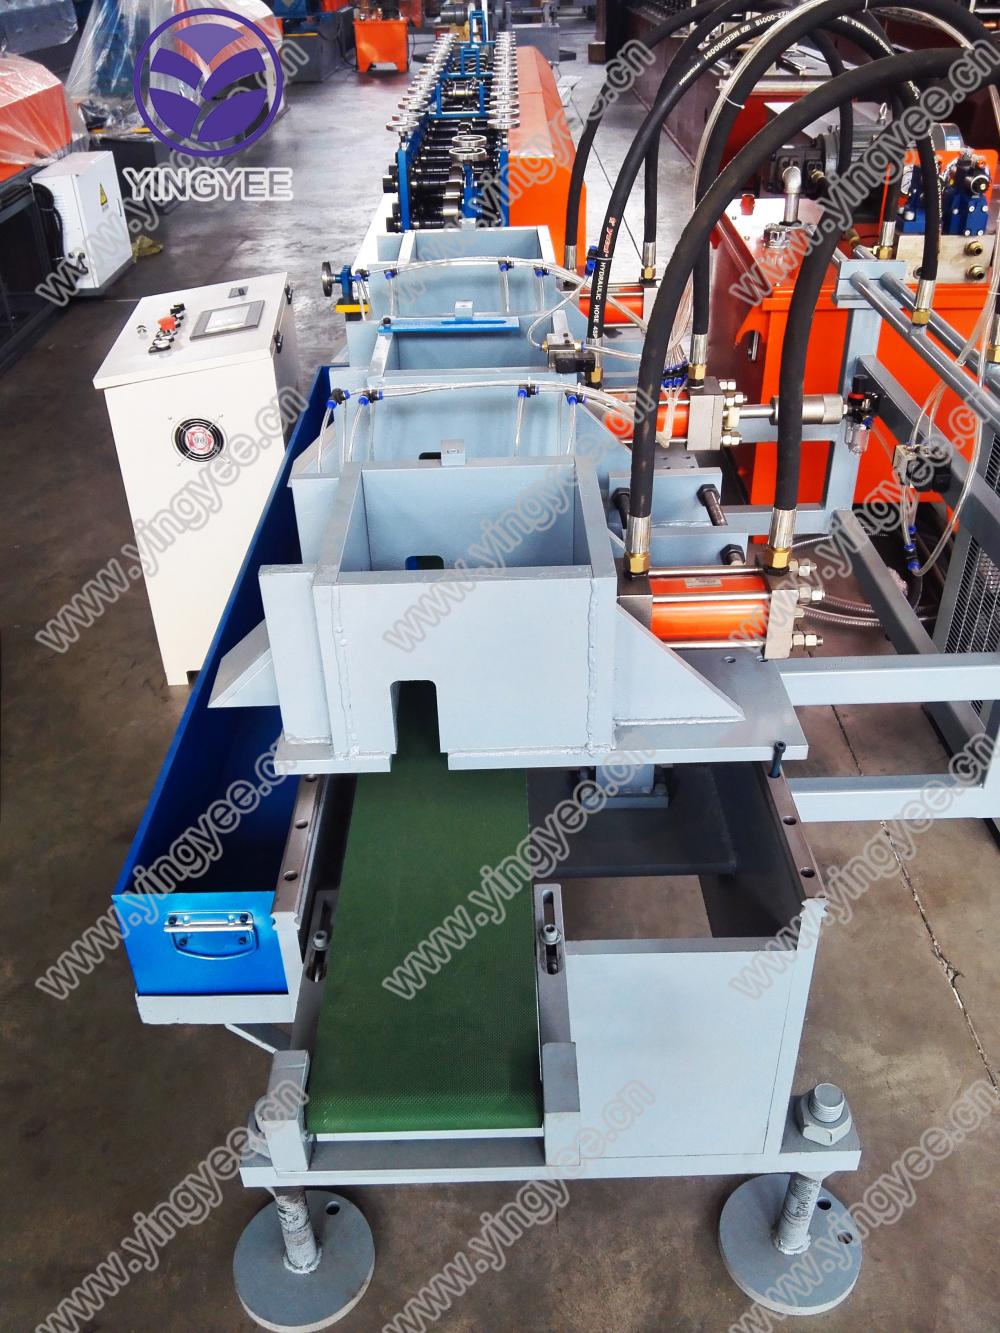 T Ceiling Bar Machine From Yingyee007